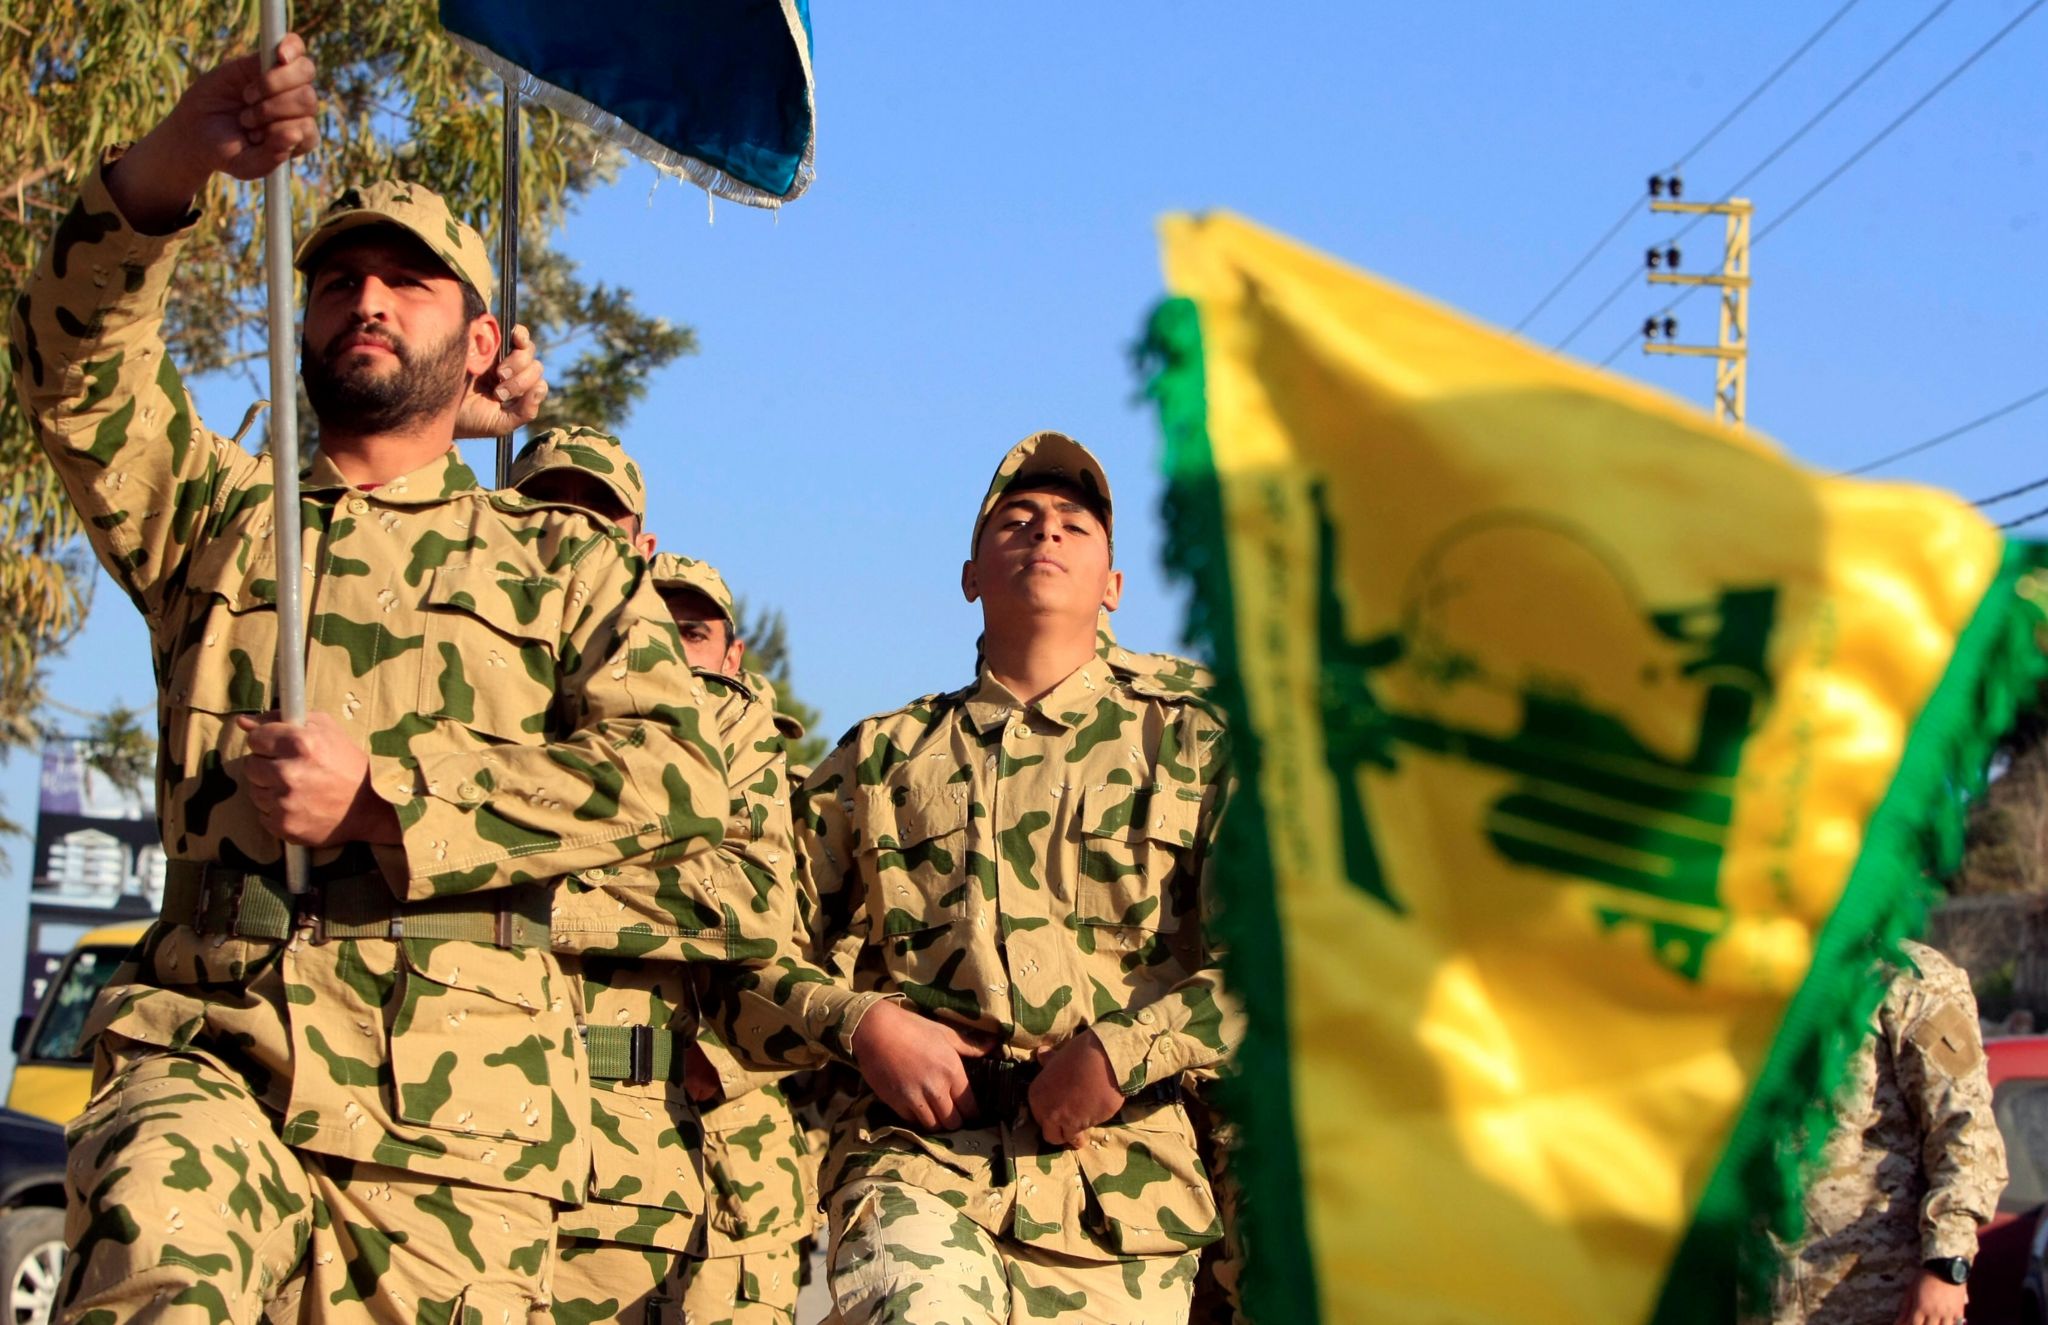 Hezbollah fighters parade during a ceremony to honor fallen comrades, in Tefahta village, south Lebanon, Saturday, Feb. 18, 2017.